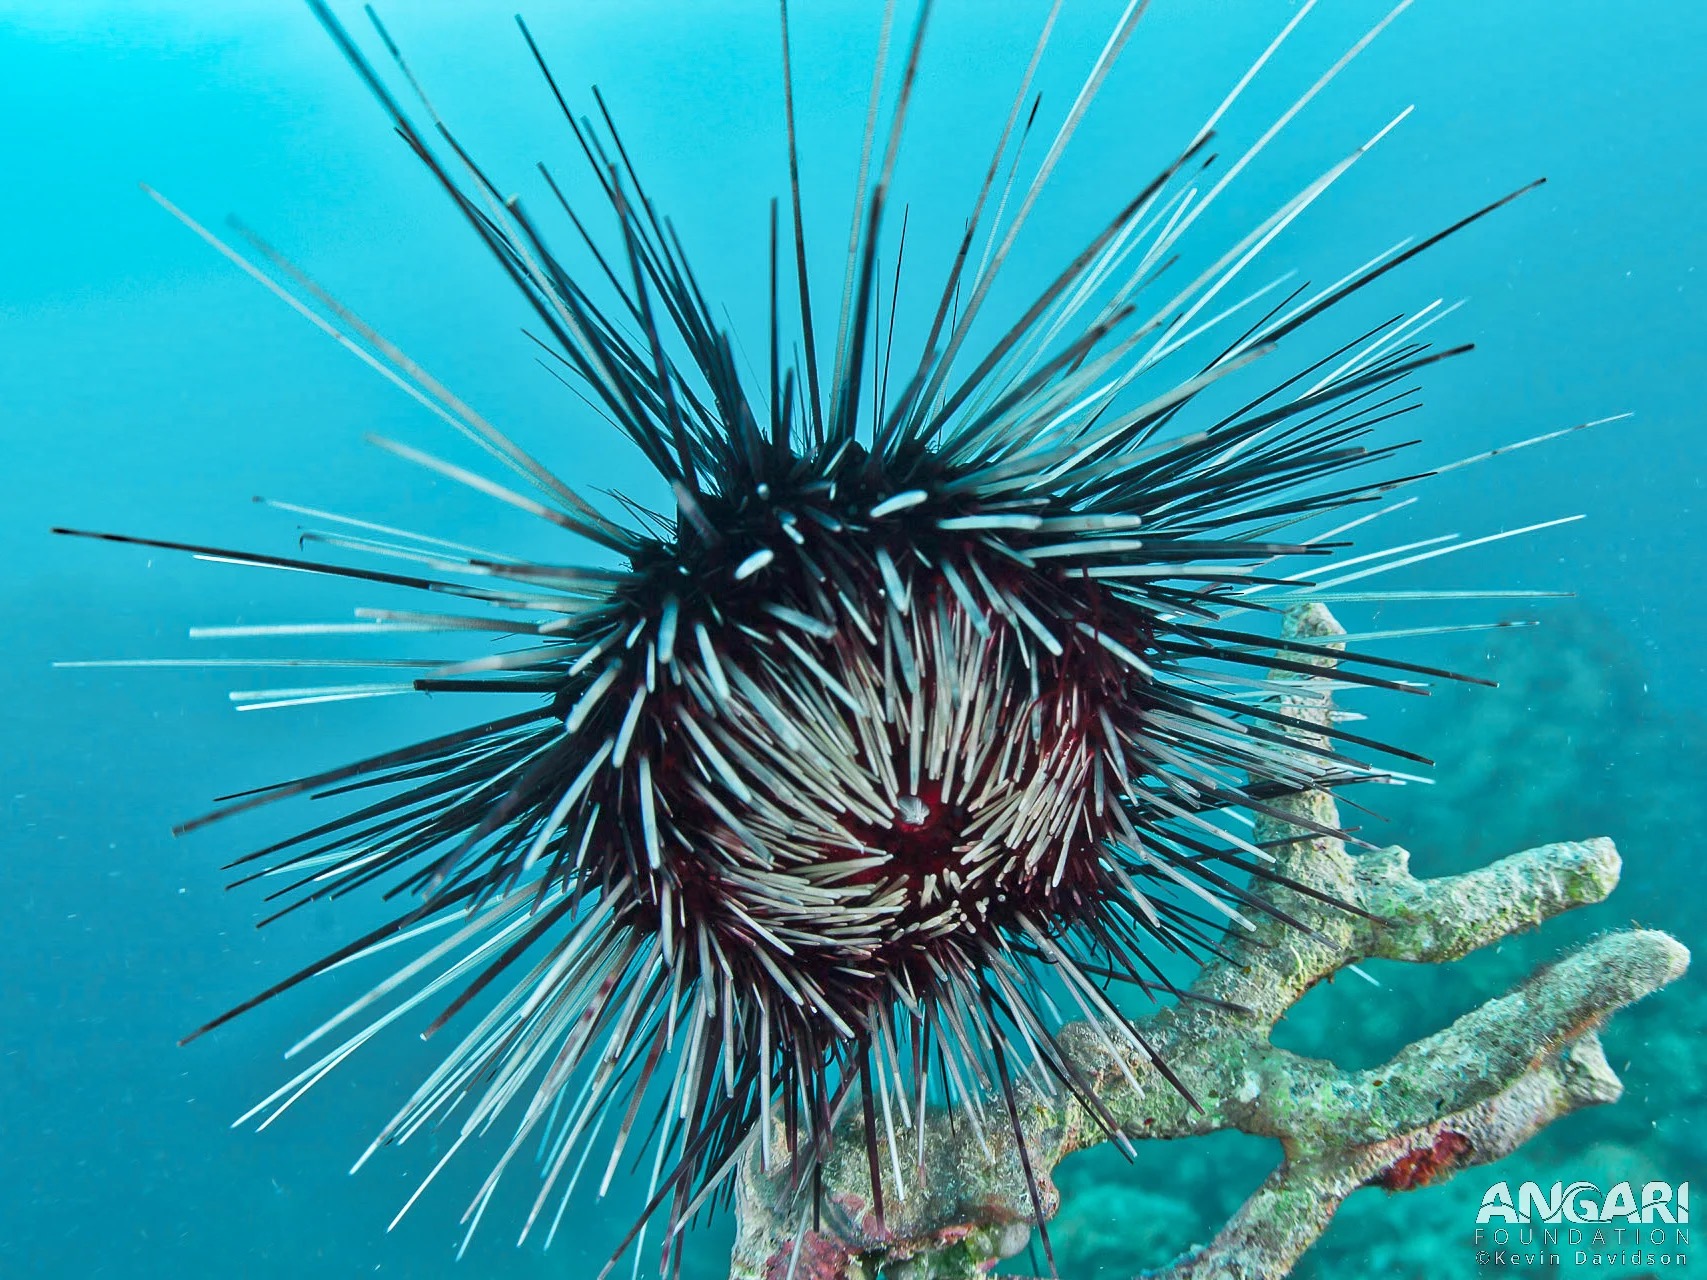 Long-spined sea urchin on coral.